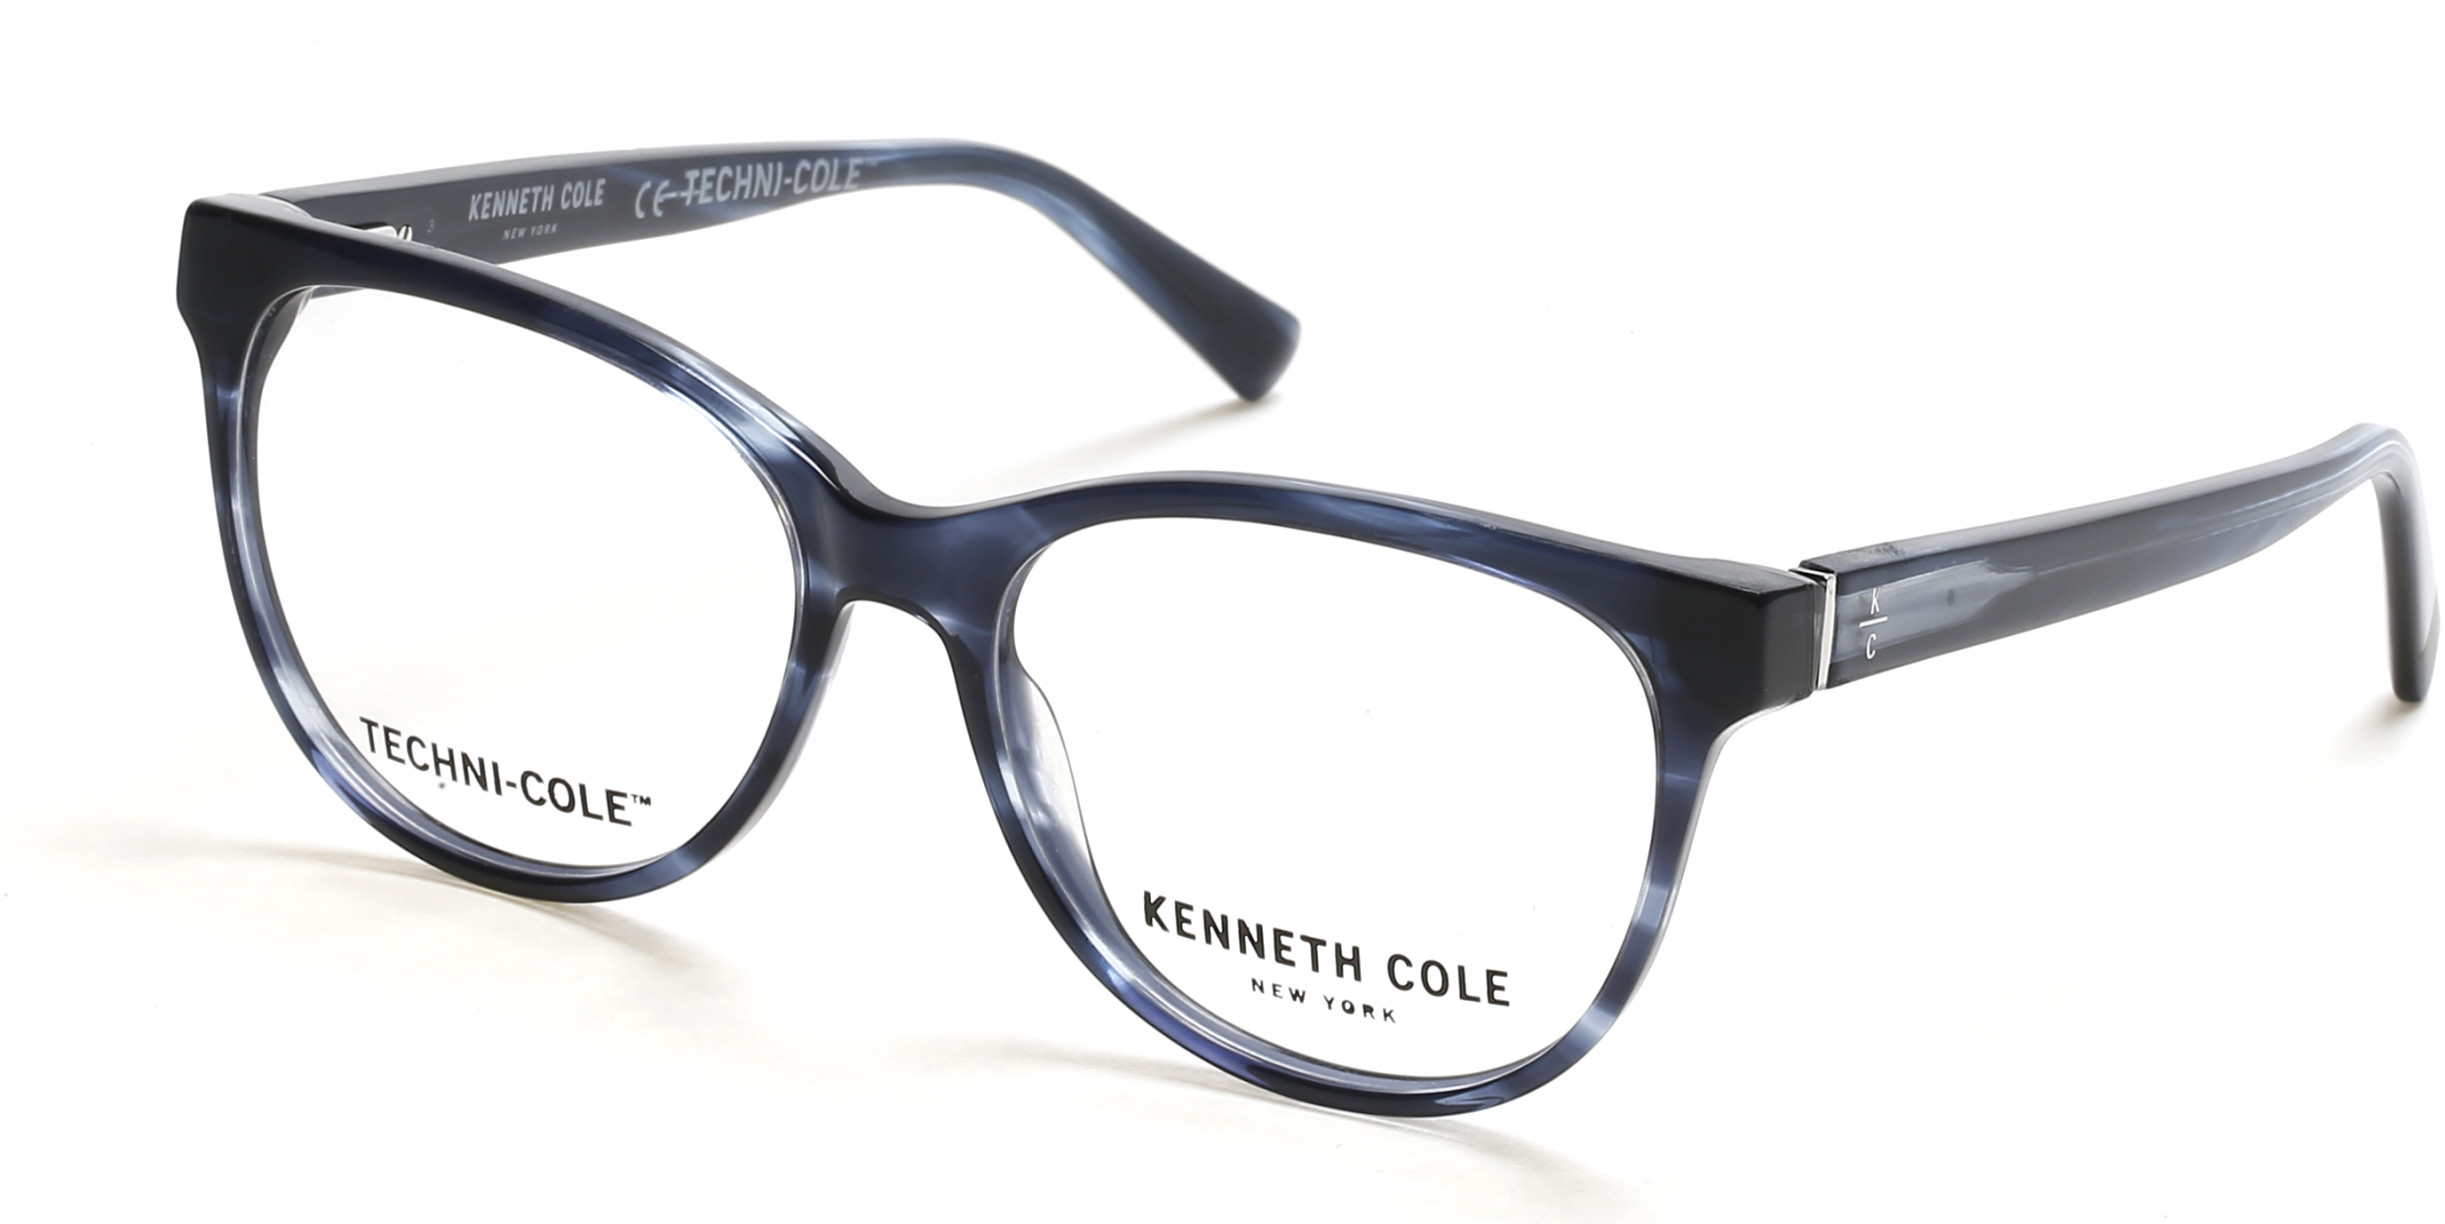 KENNETH COLE NY 0334 090